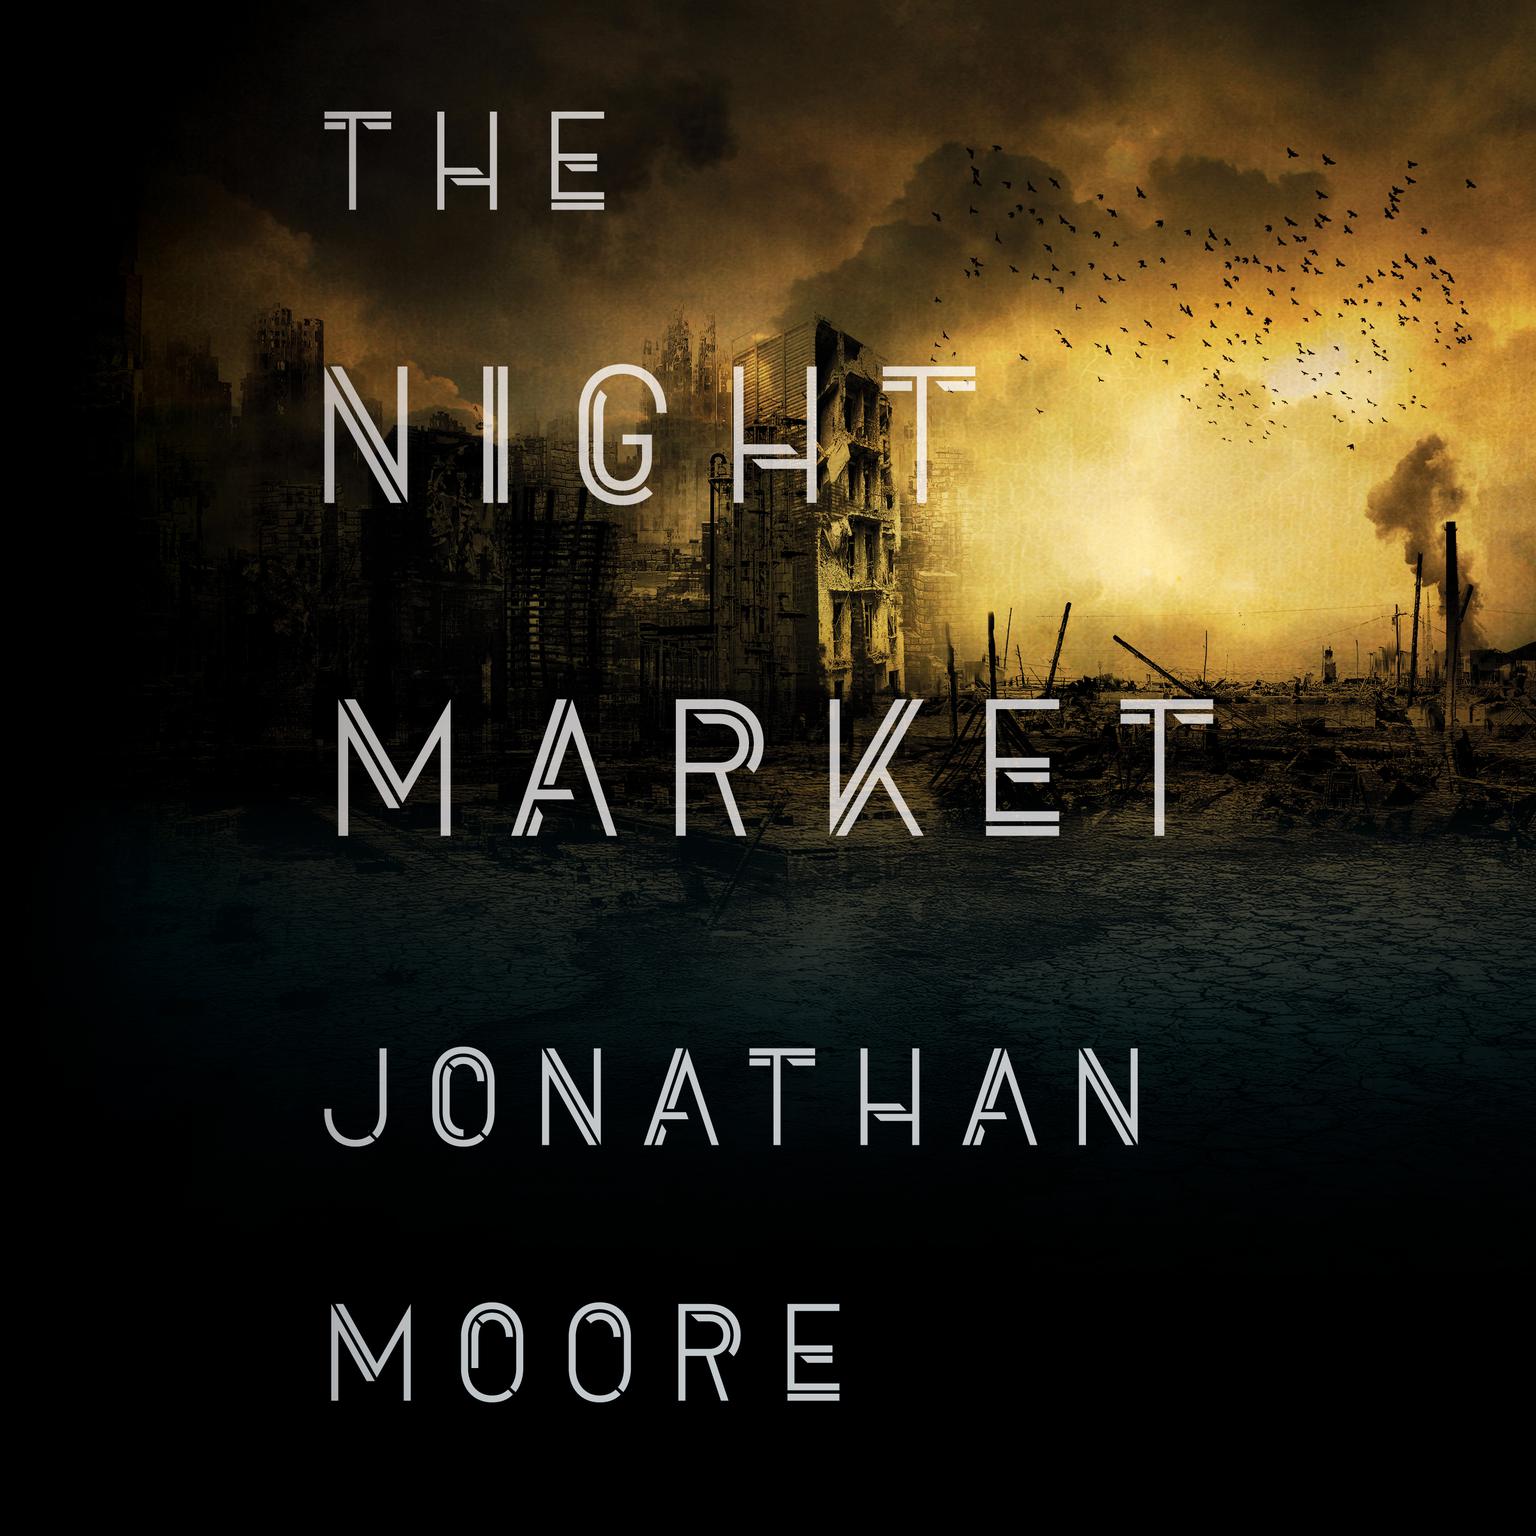 The Night Market Audiobook, by Jonathan Moore